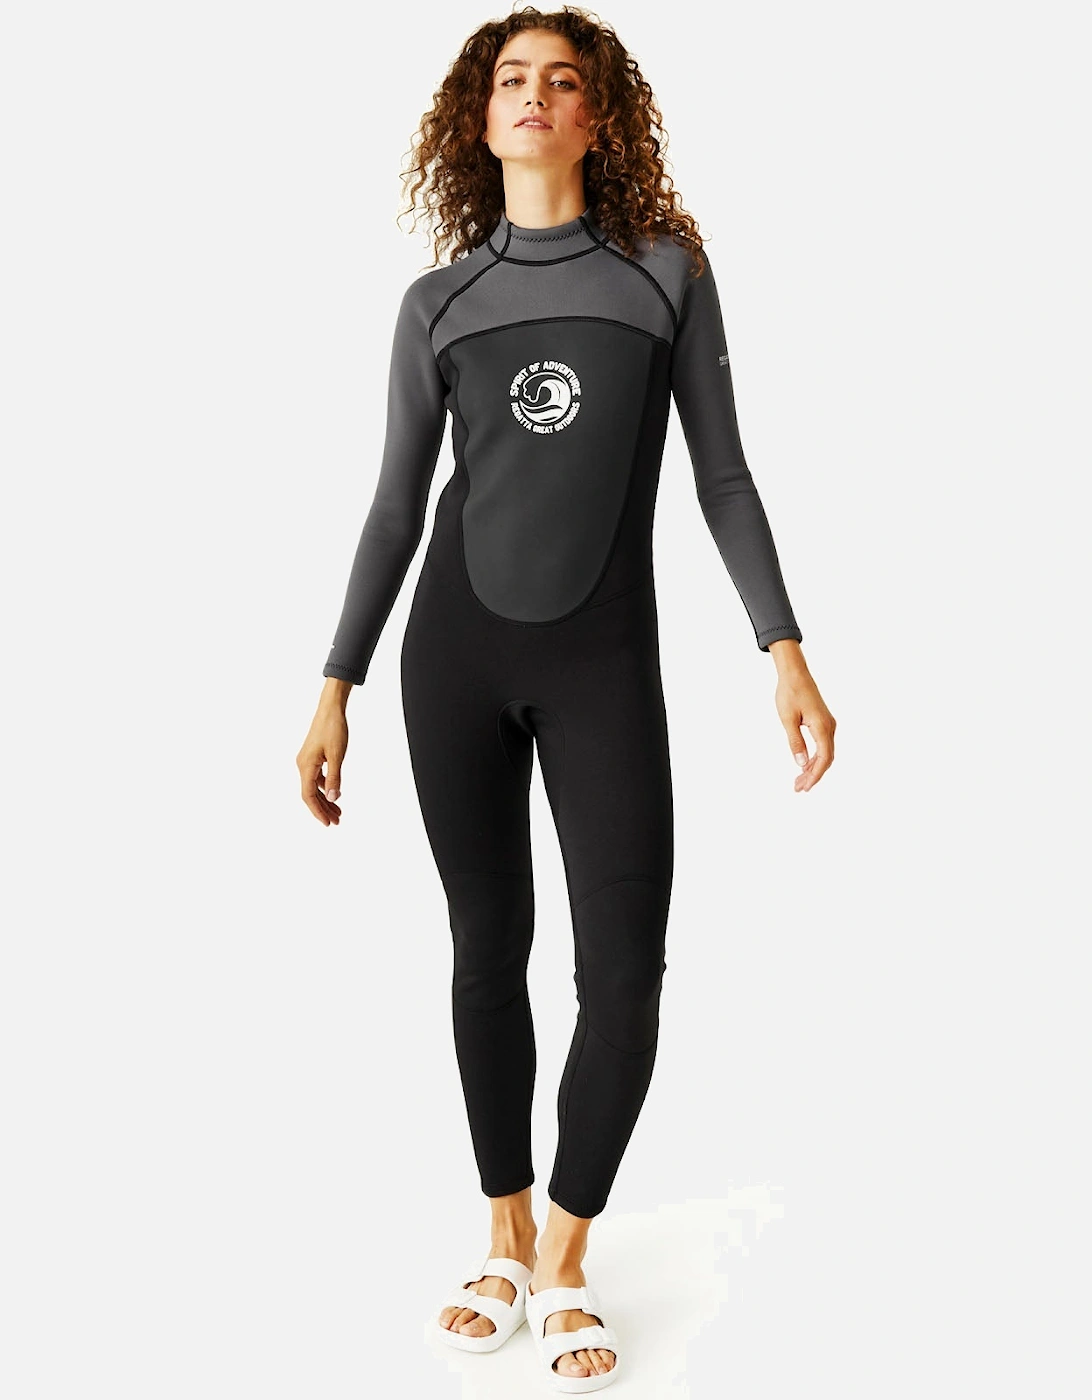 Womens Full Surfing Back Zip Wetsuit, 16 of 15